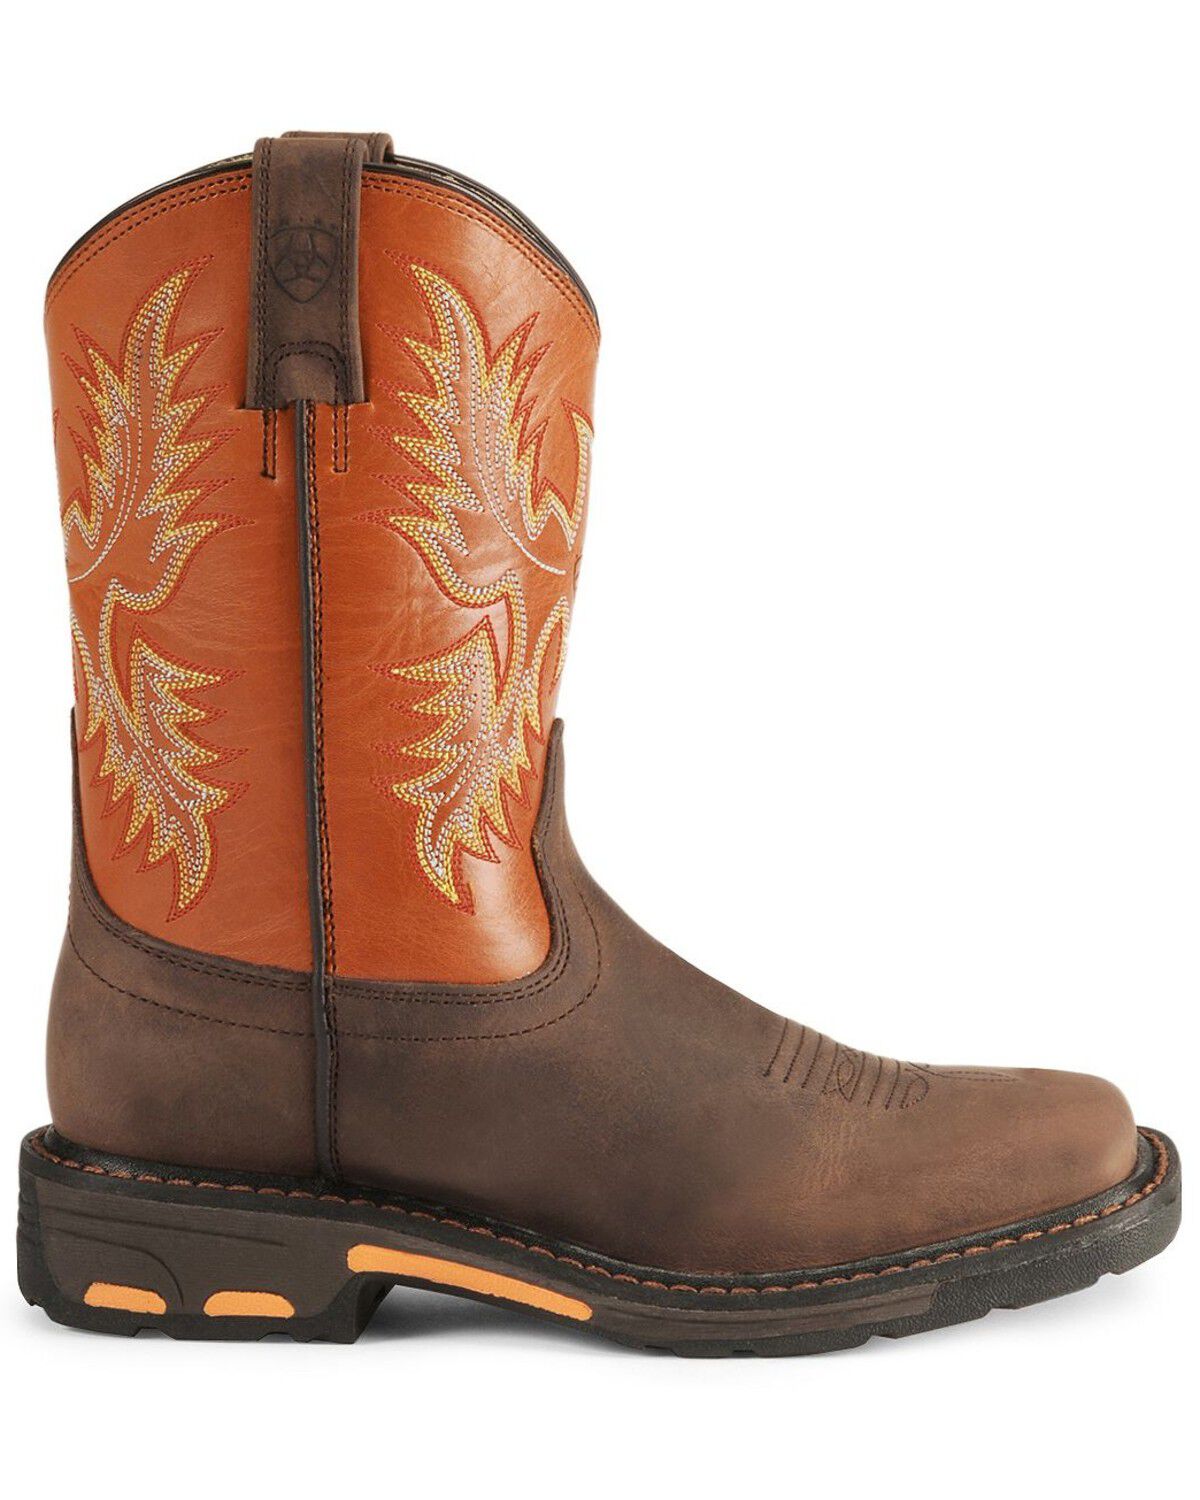 CHILDREN'S/YOUTH ARIAT WORK HOG WESTERN WORK BOOTS 10008644 SQUARE TOE 